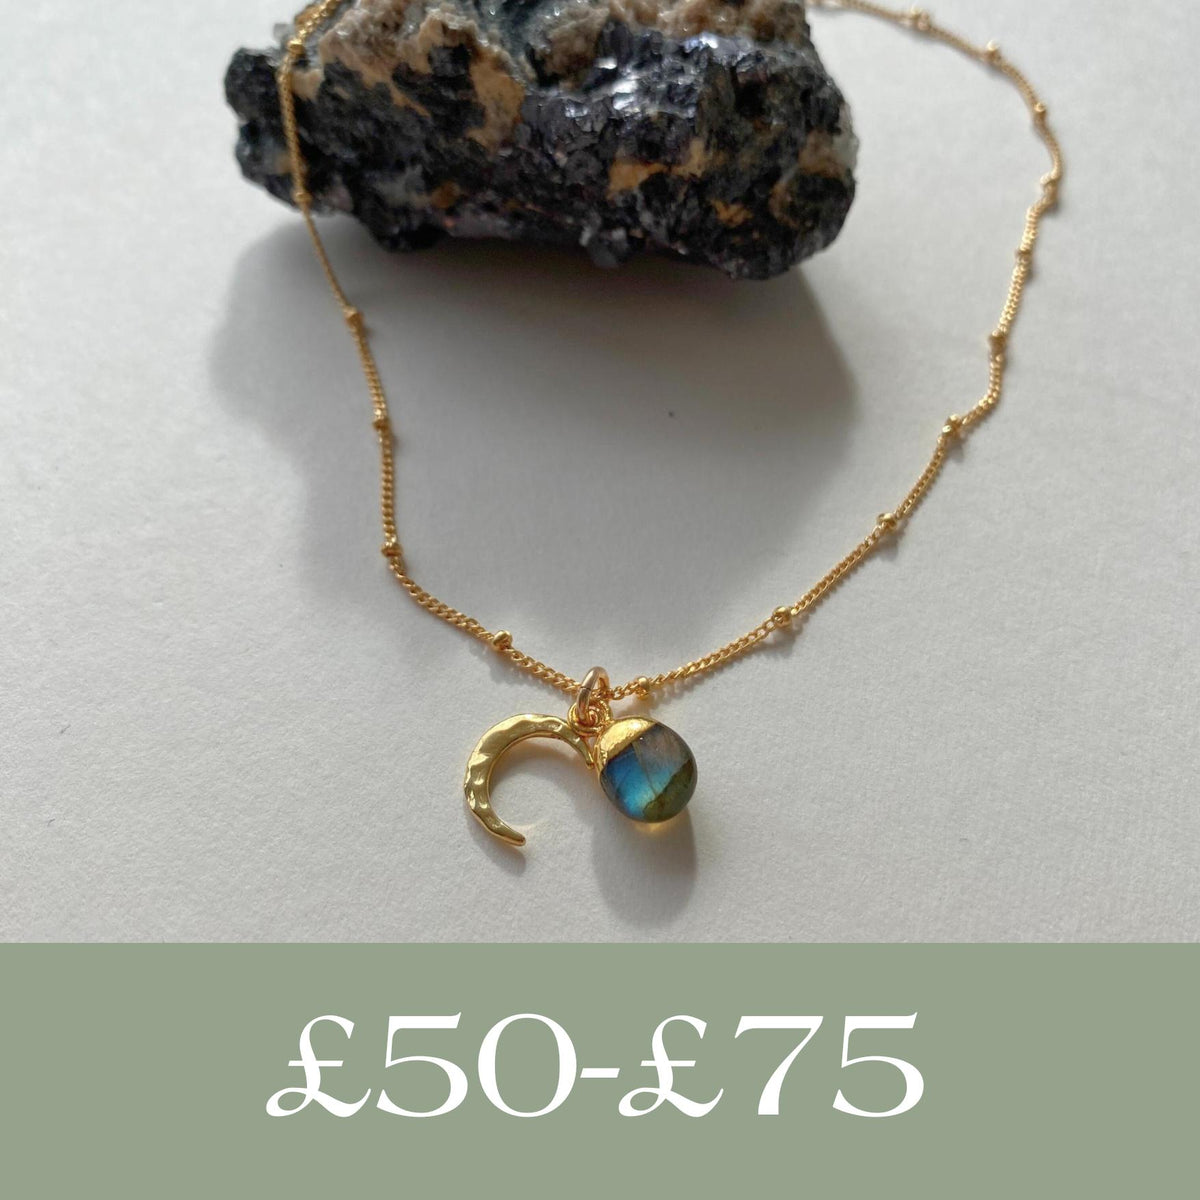 Gifts £50-£75 – Decadorn